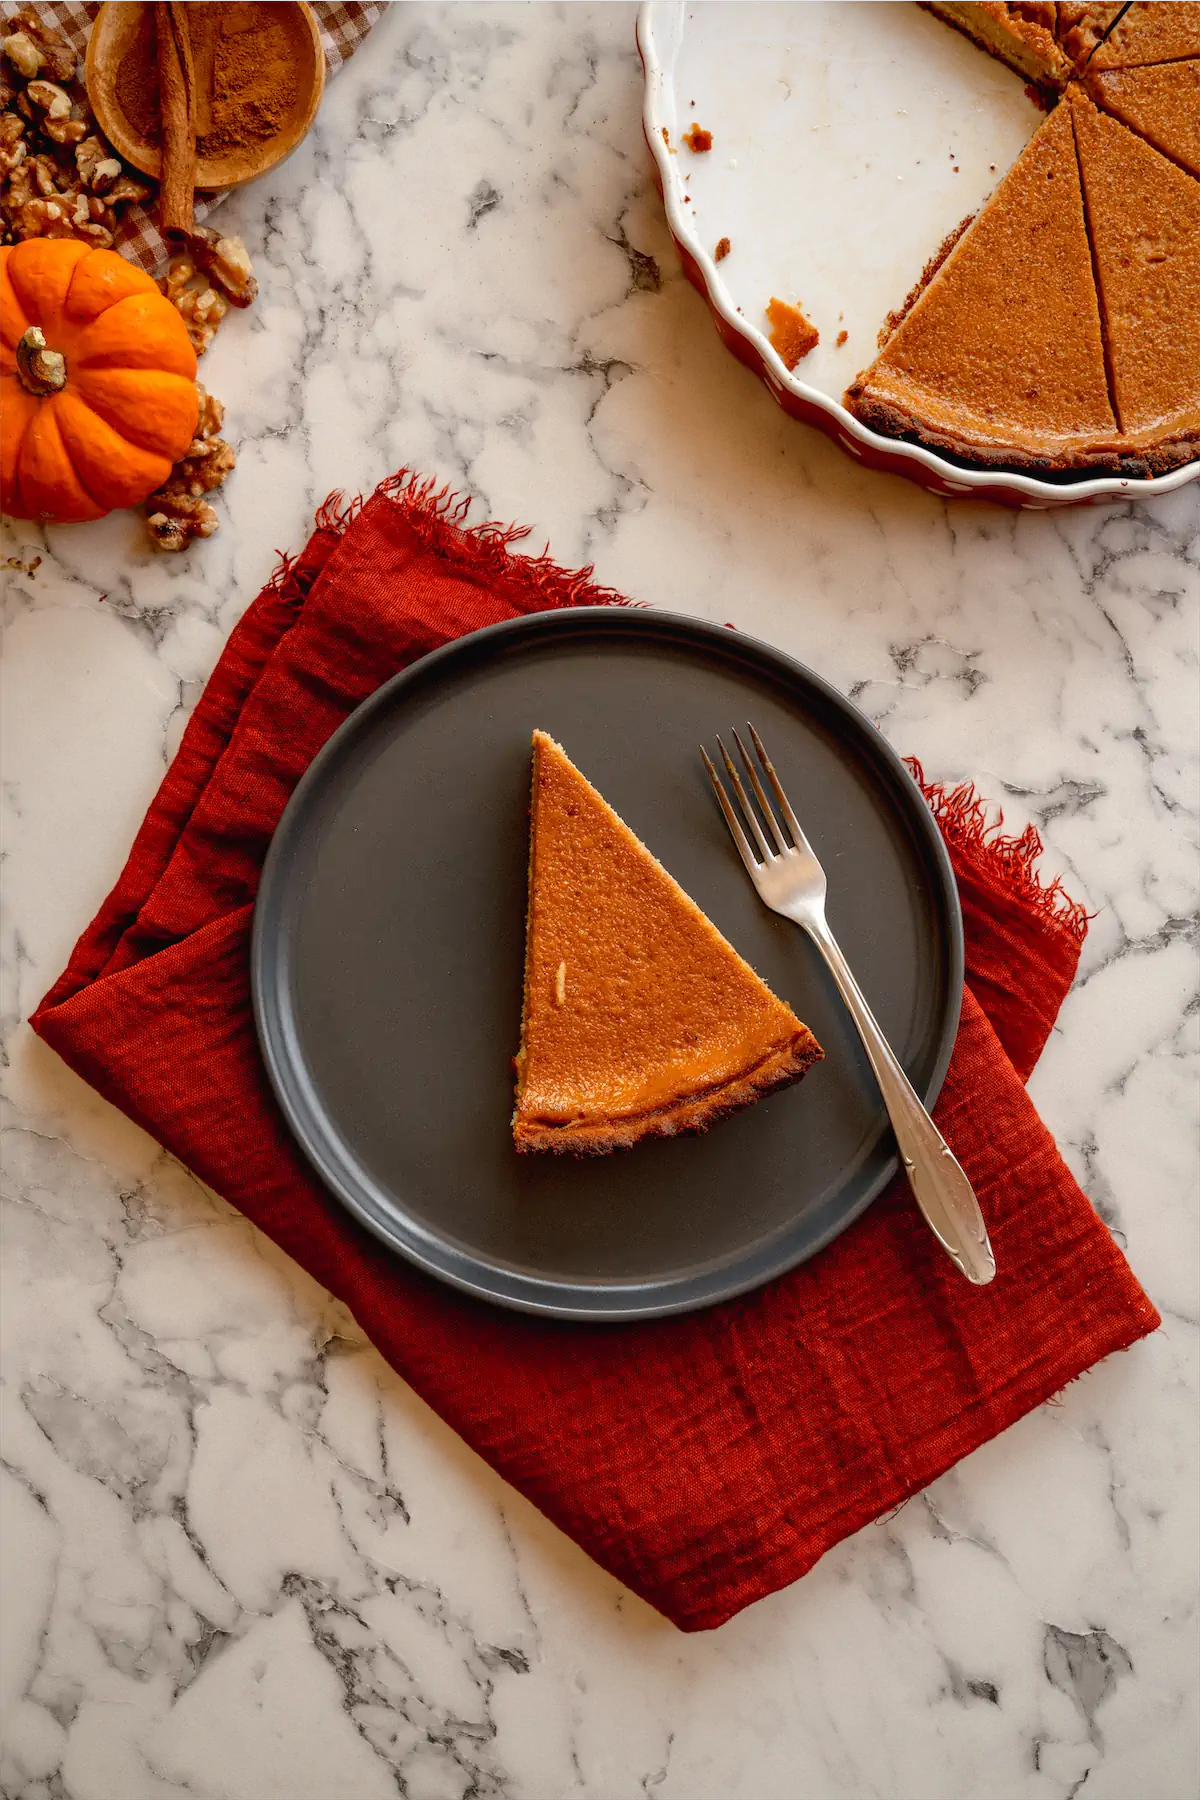 A slice of homemade pumpkin pie served on a plate with a fork.